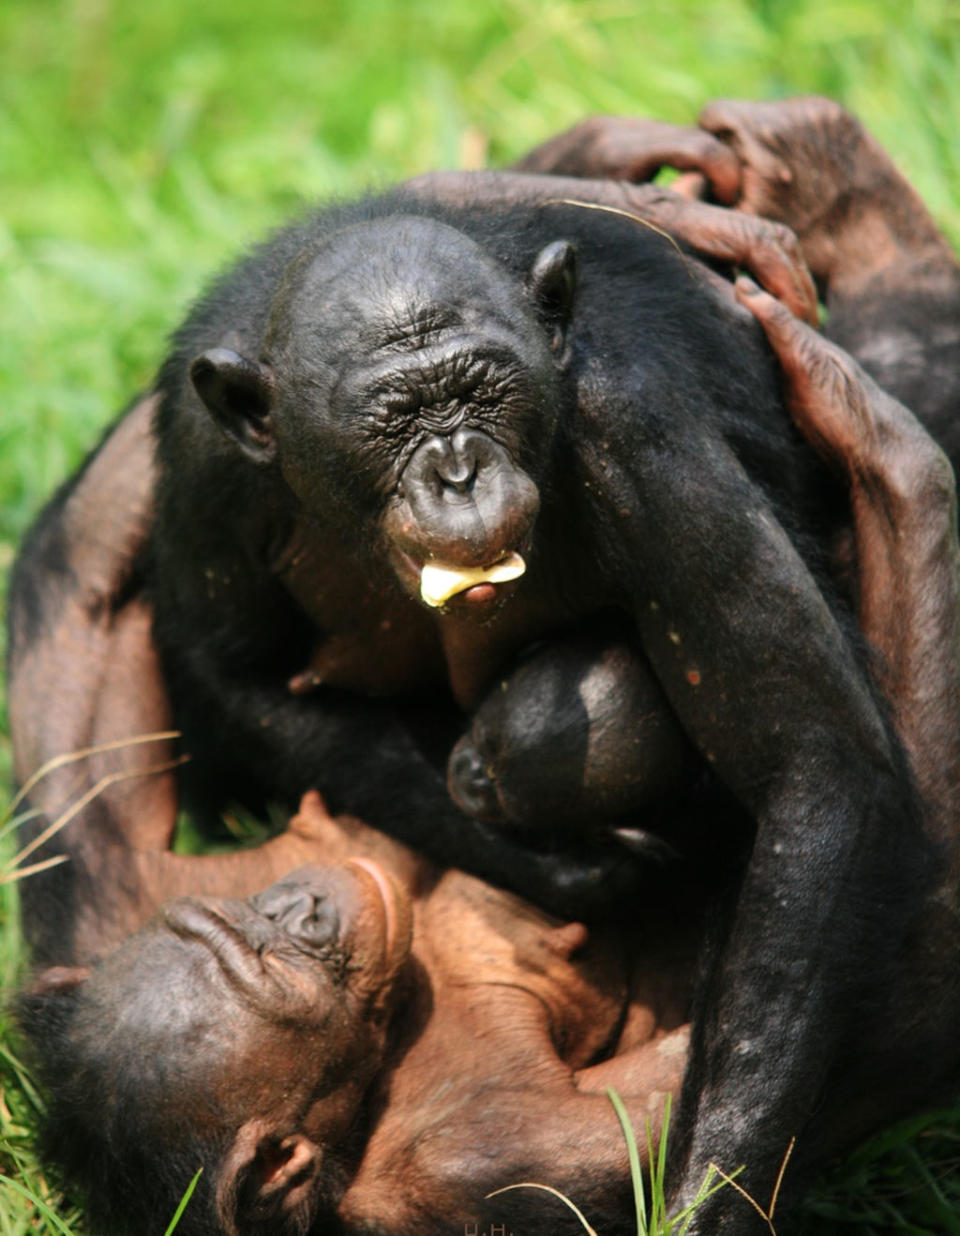 A female bonobo embraces a newcomer on her first day in a new group. <cite>Courtesy of Lola ya Bonobo Sanctuary</cite>